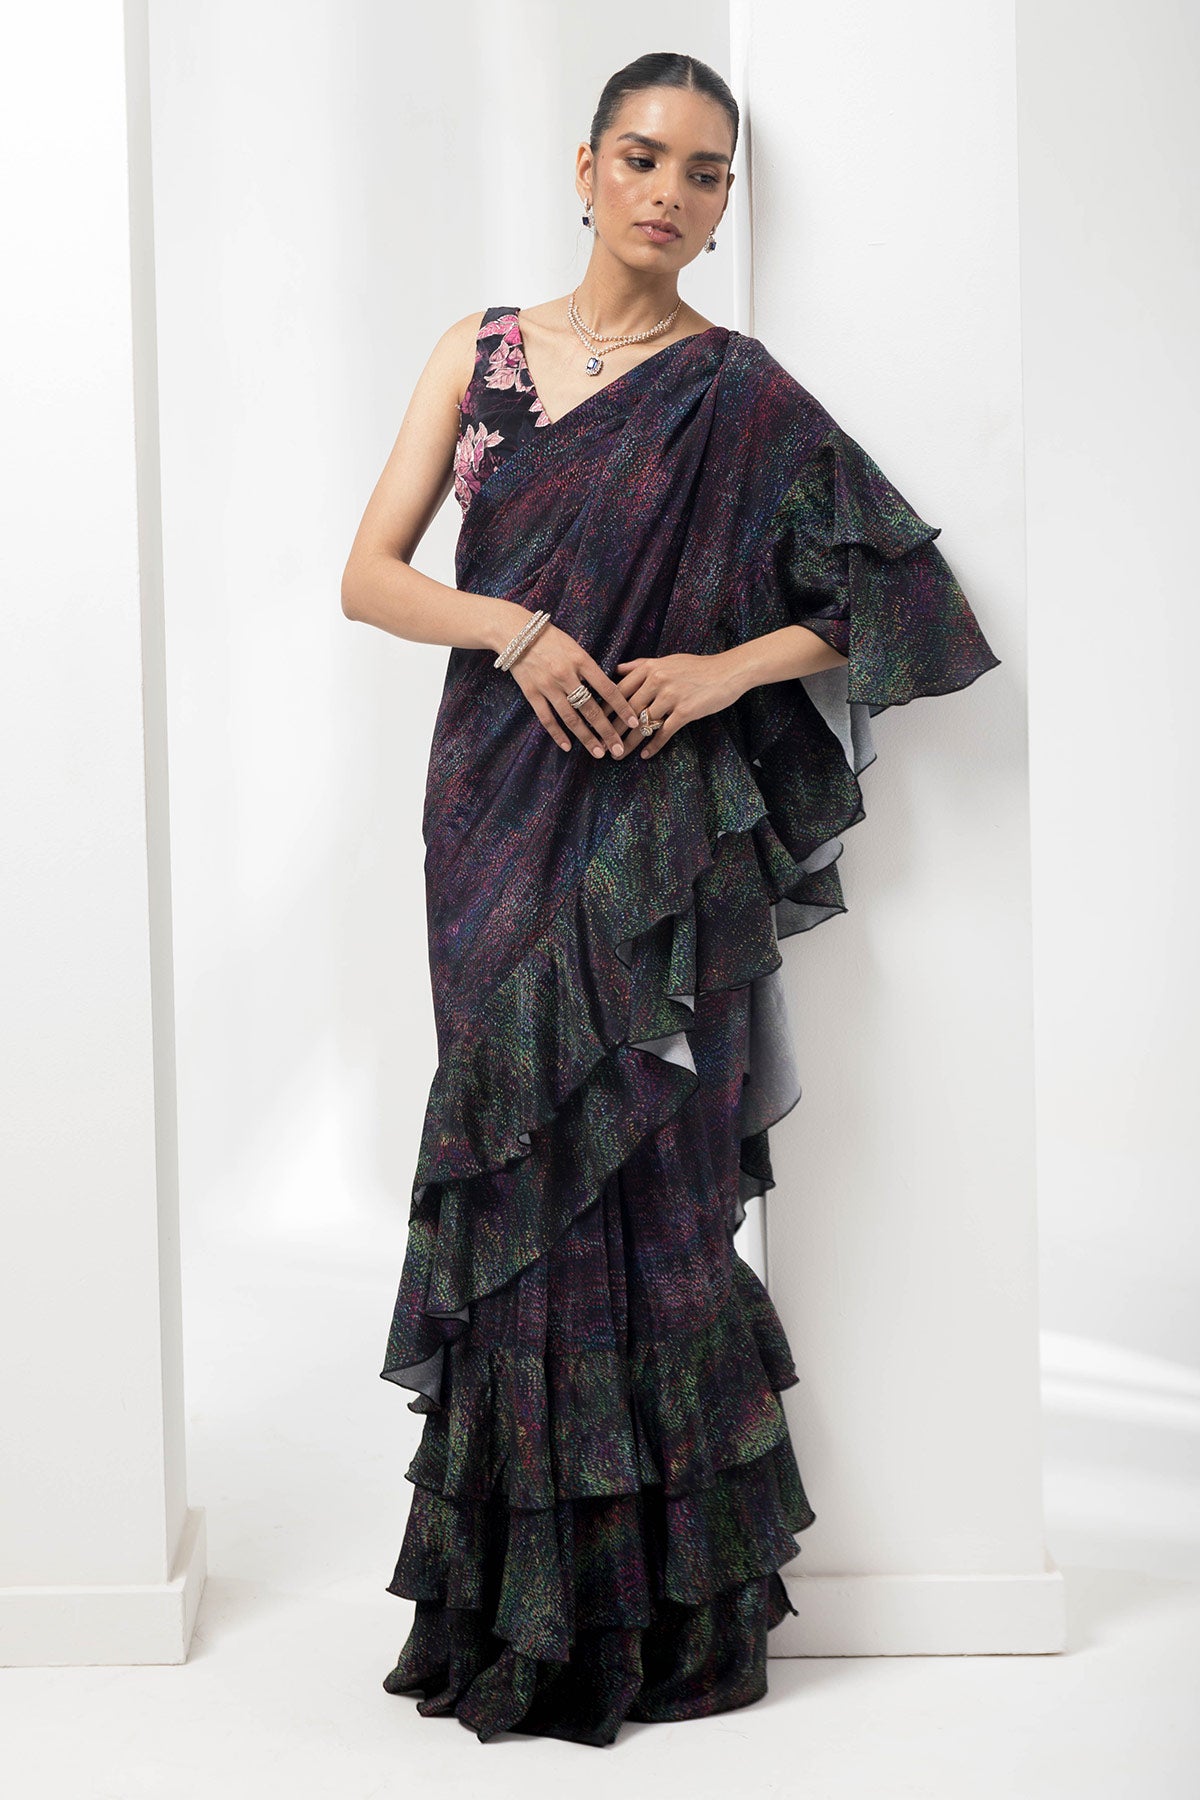 wave-ruffled pre-stiched saree with flauna highlighting blouse